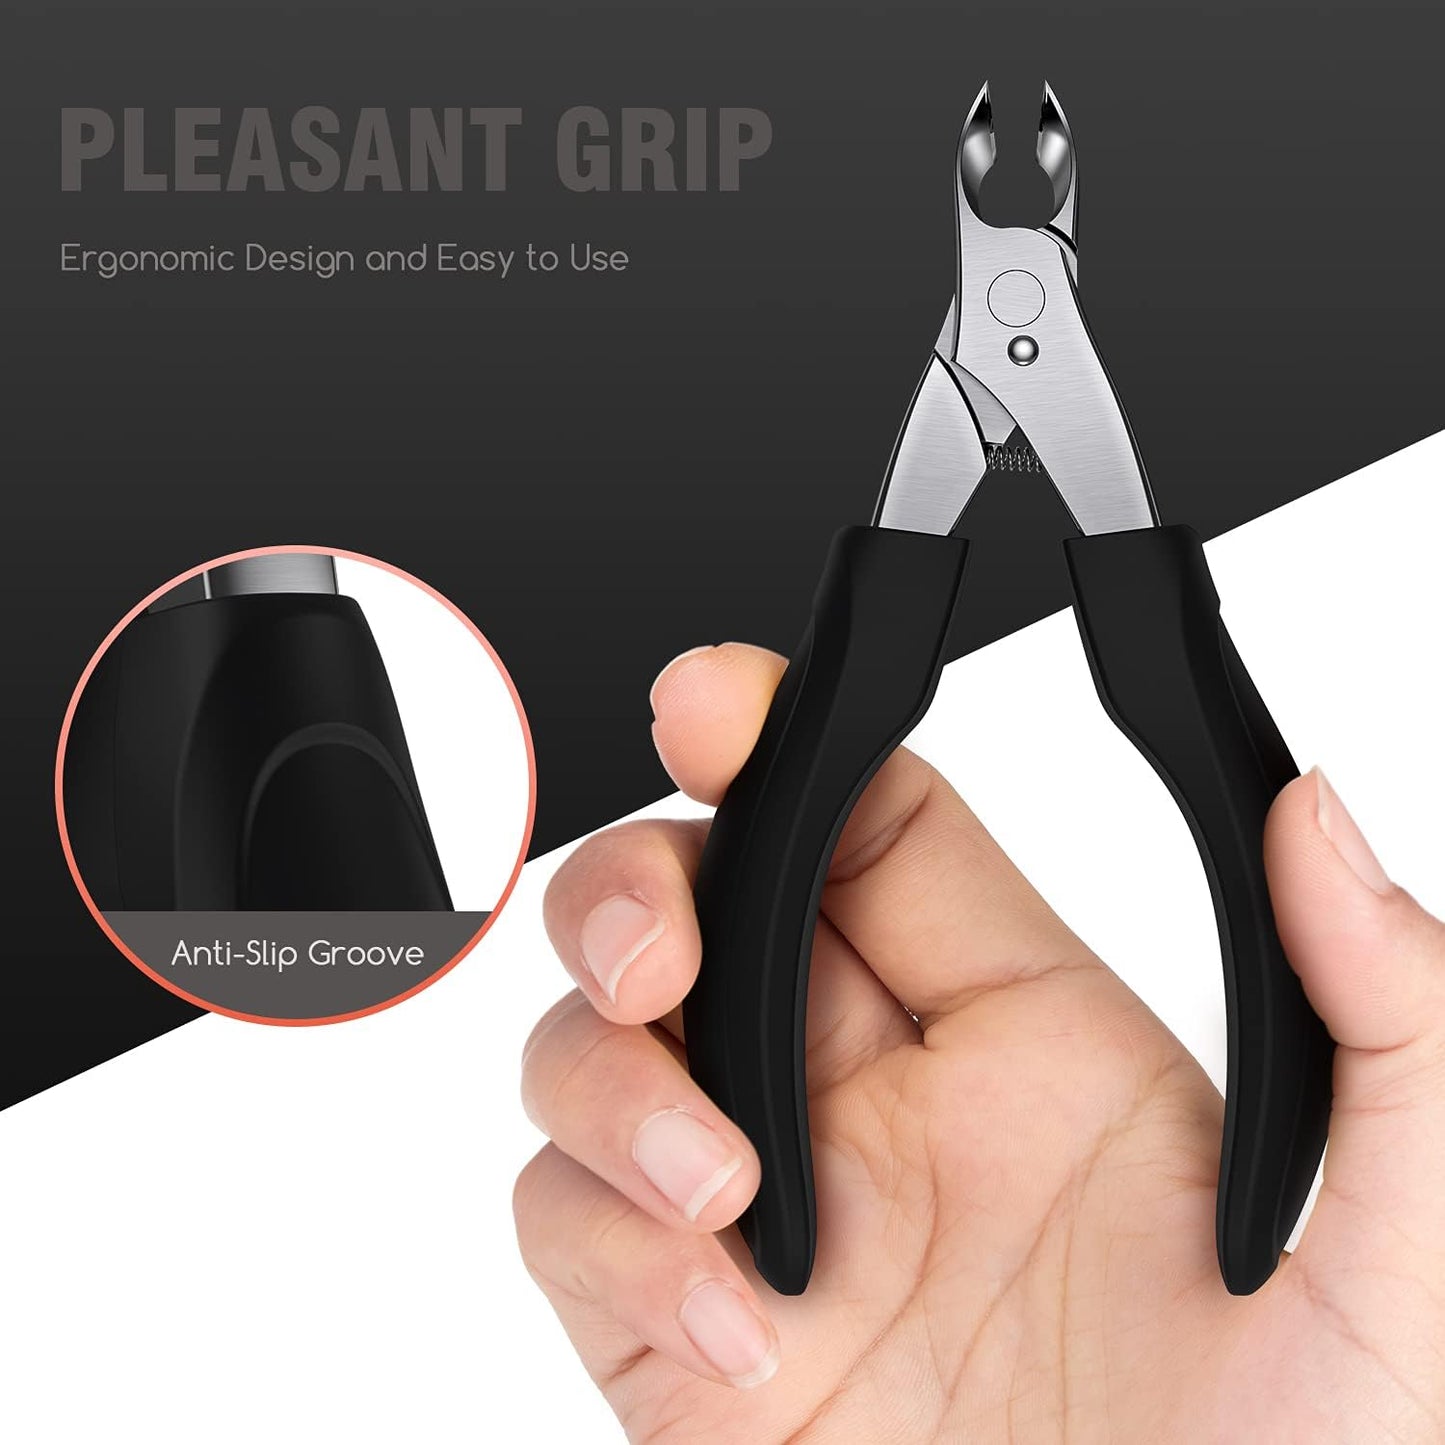 Professional Nail Cutter - Curved Blade